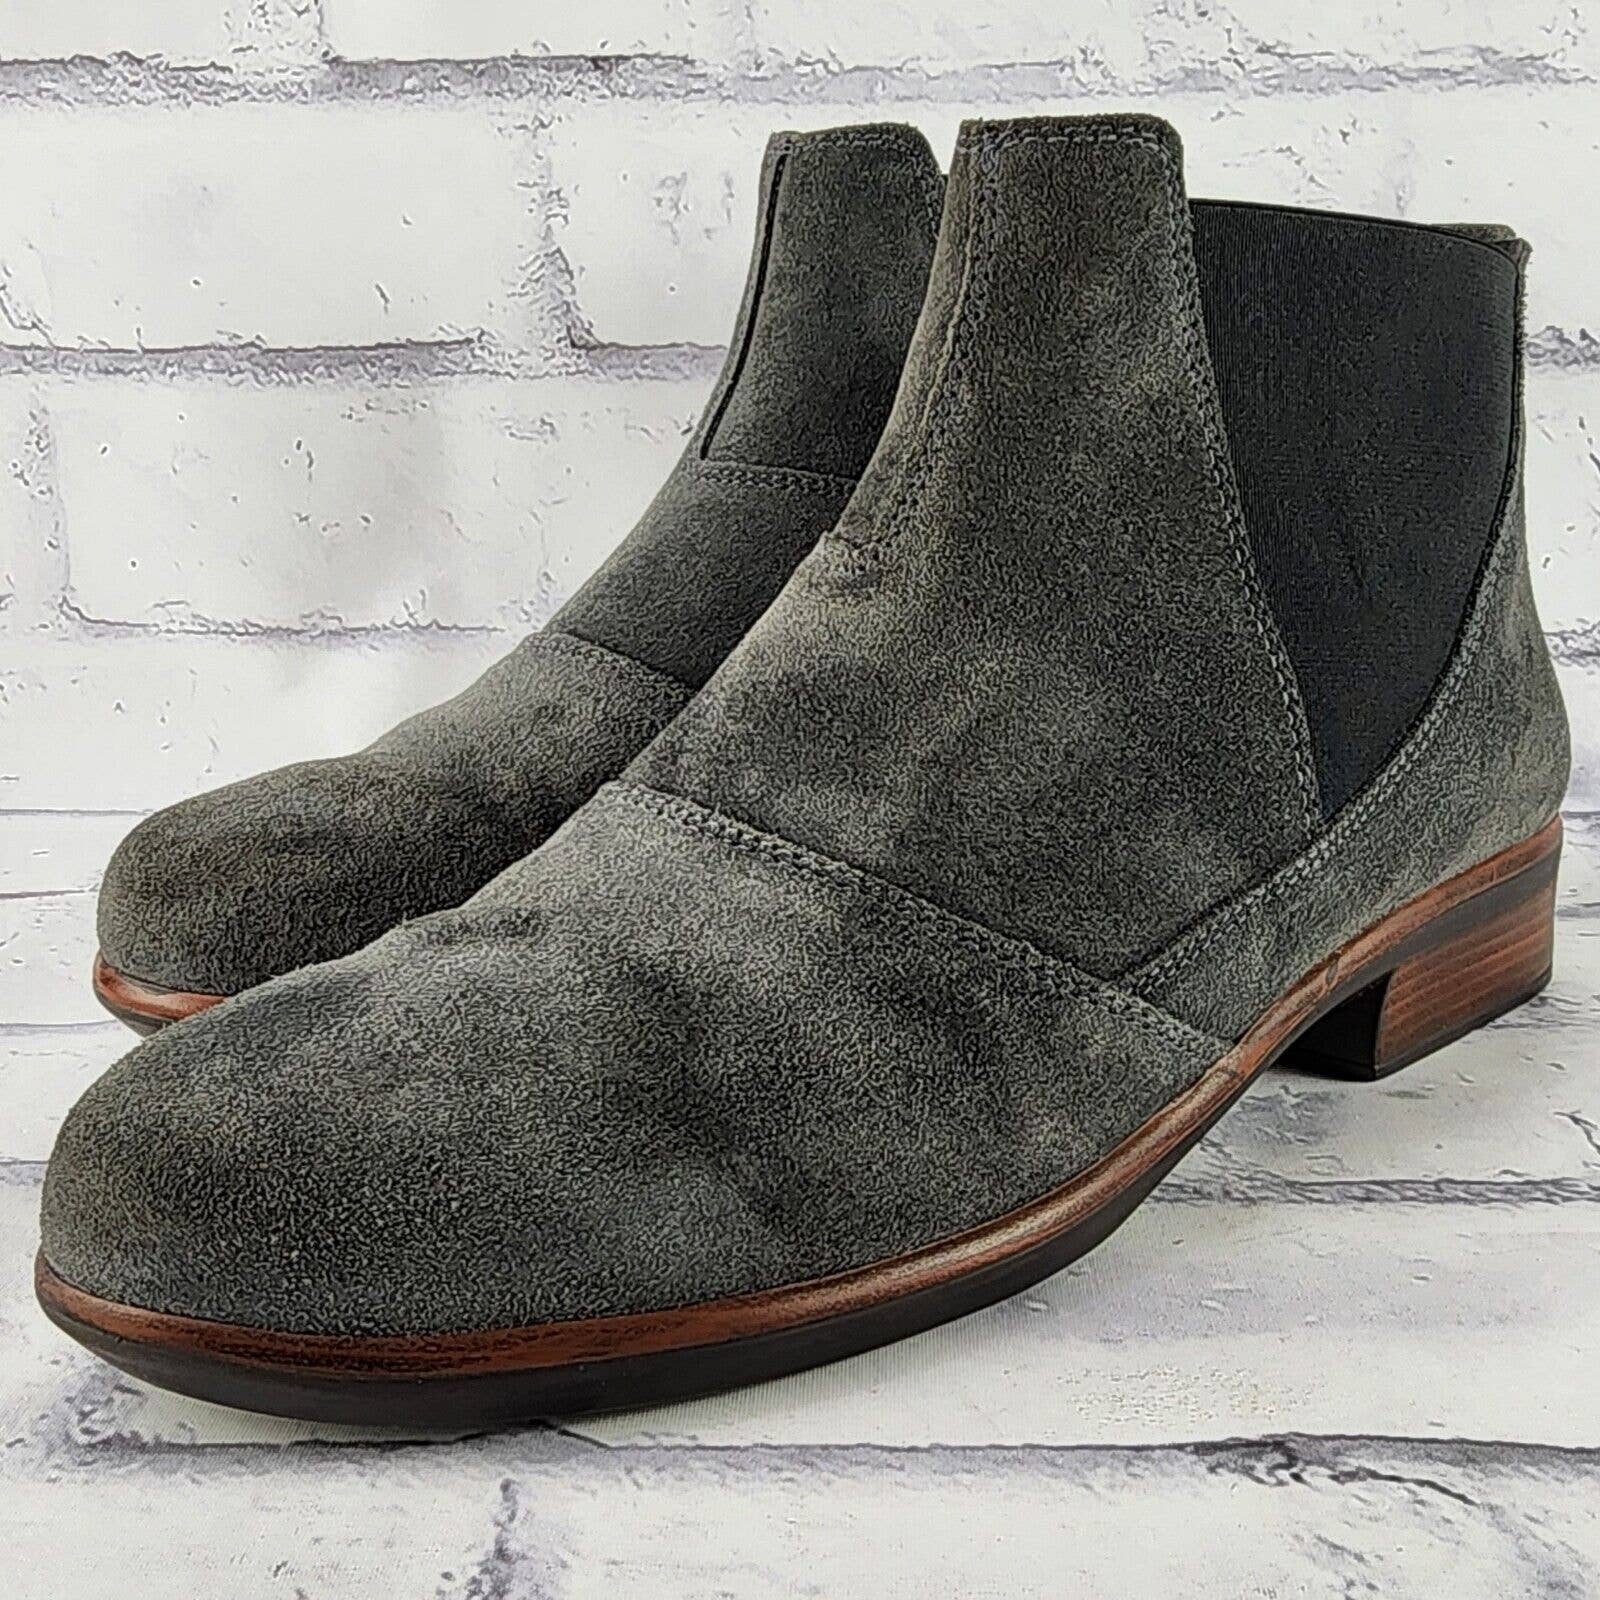 Naot Ruzgar Ankle Booties Women's Sz 39 (US 8) Gray Suede Chelsea Boots